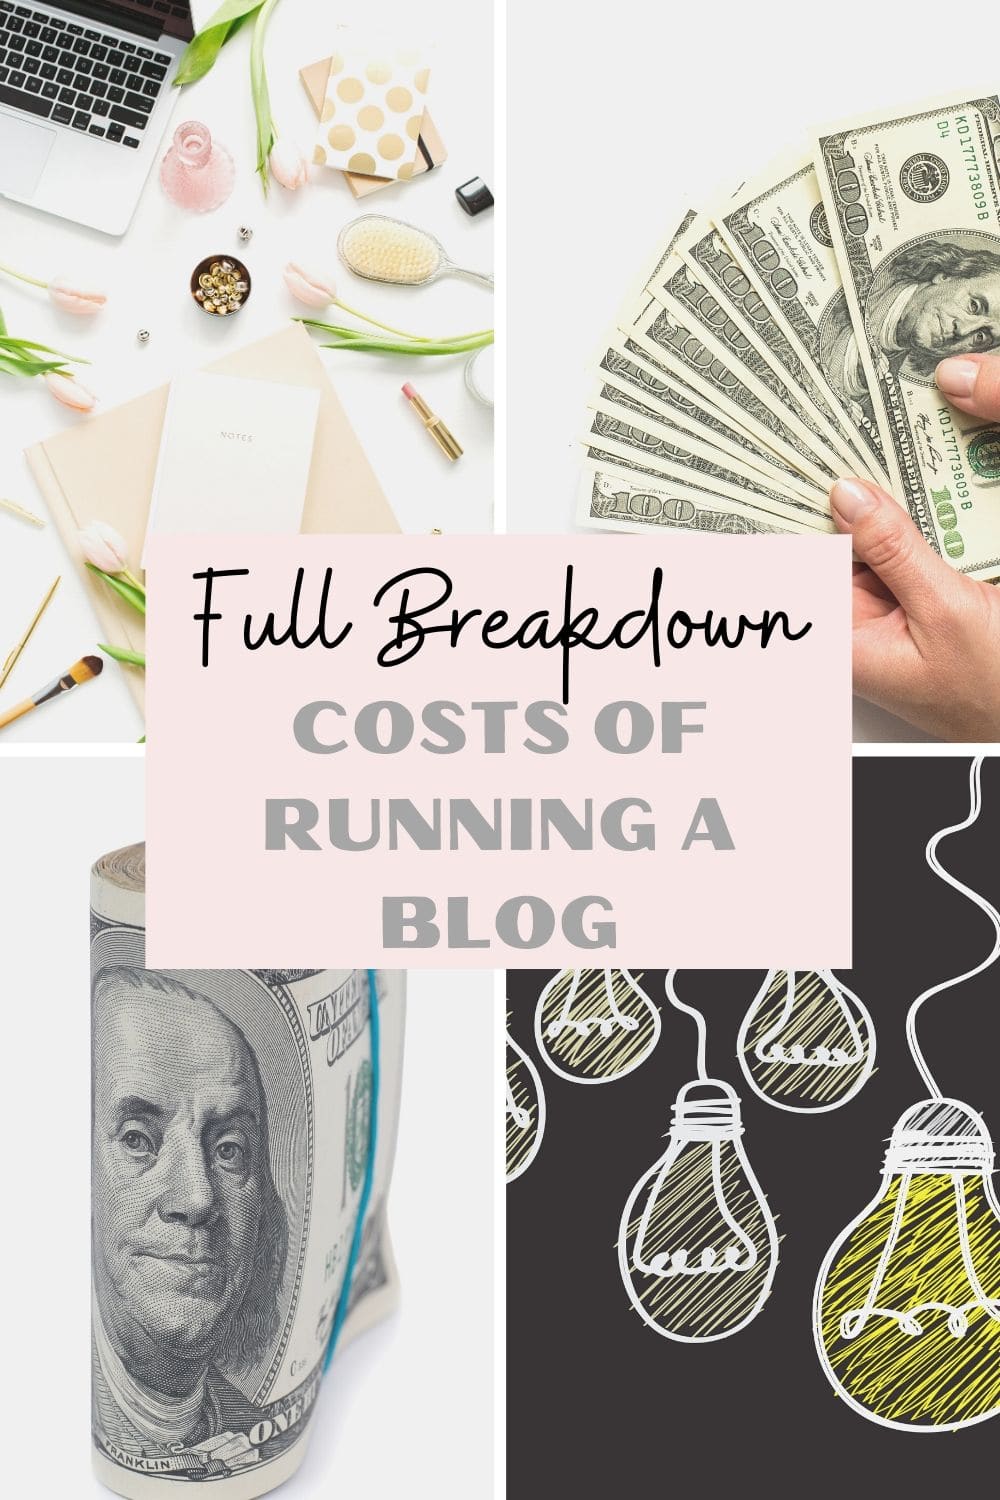 Costs of Running a Blog